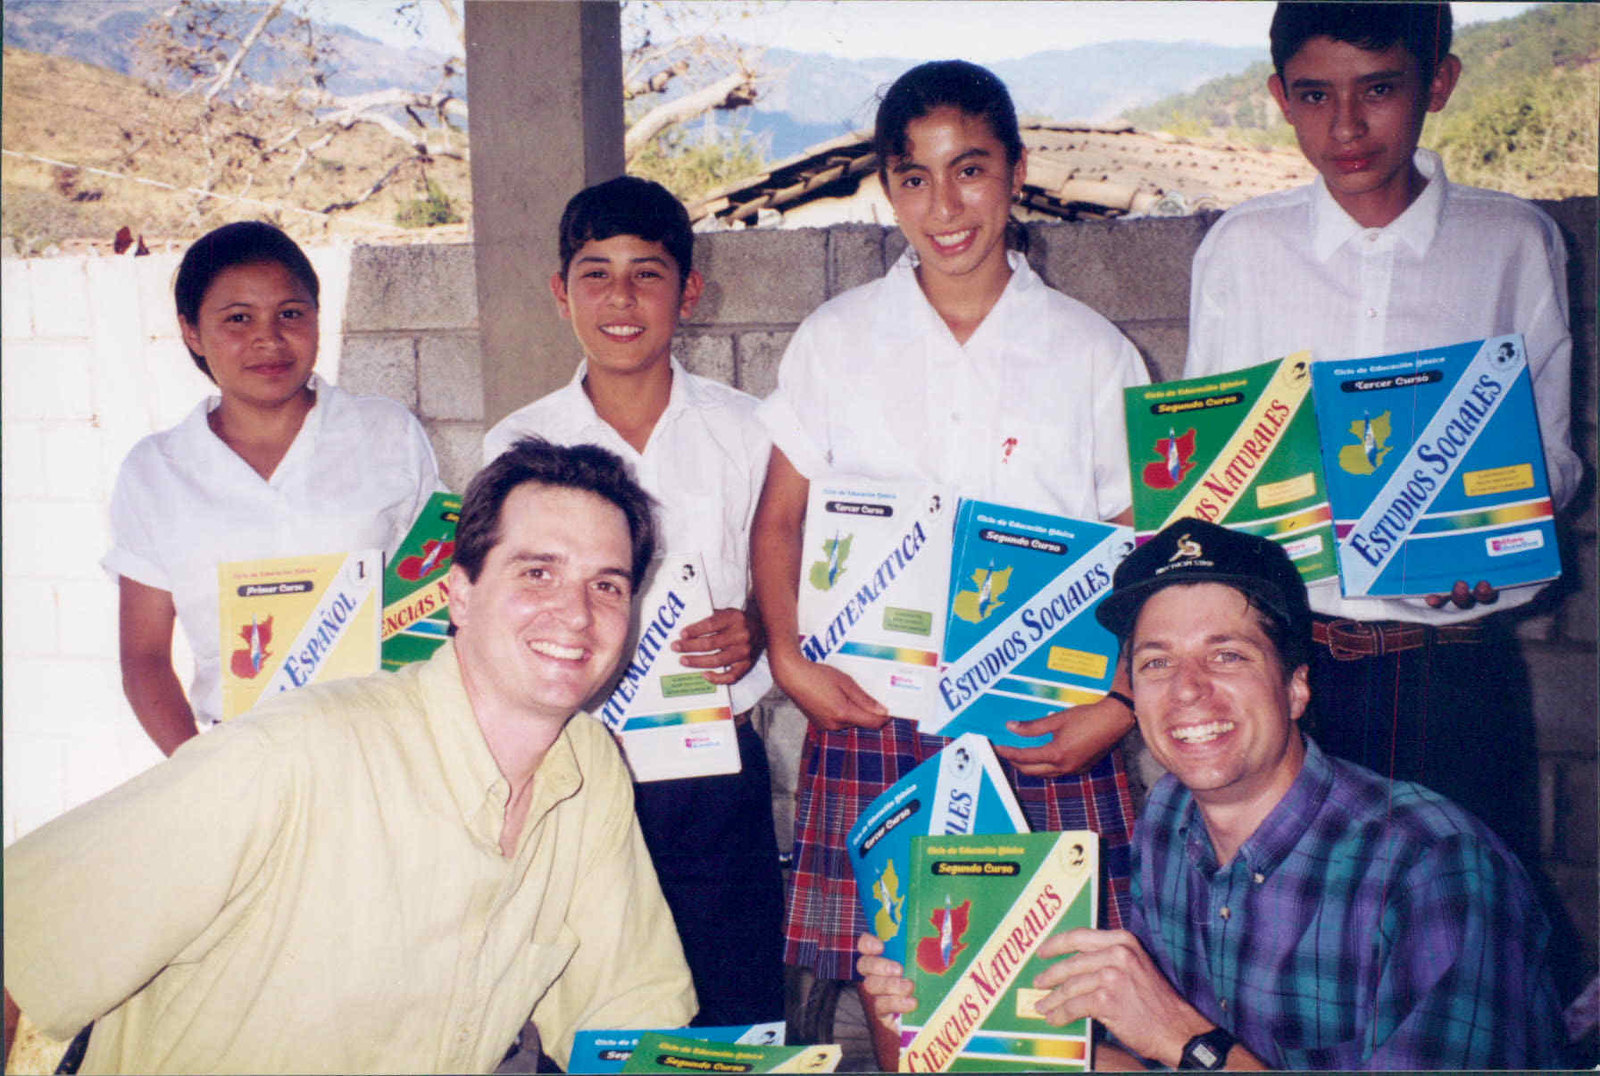 Brothers Jeff (front left) and Joe (front right) crouched in front of group of students, all holding textbooks.